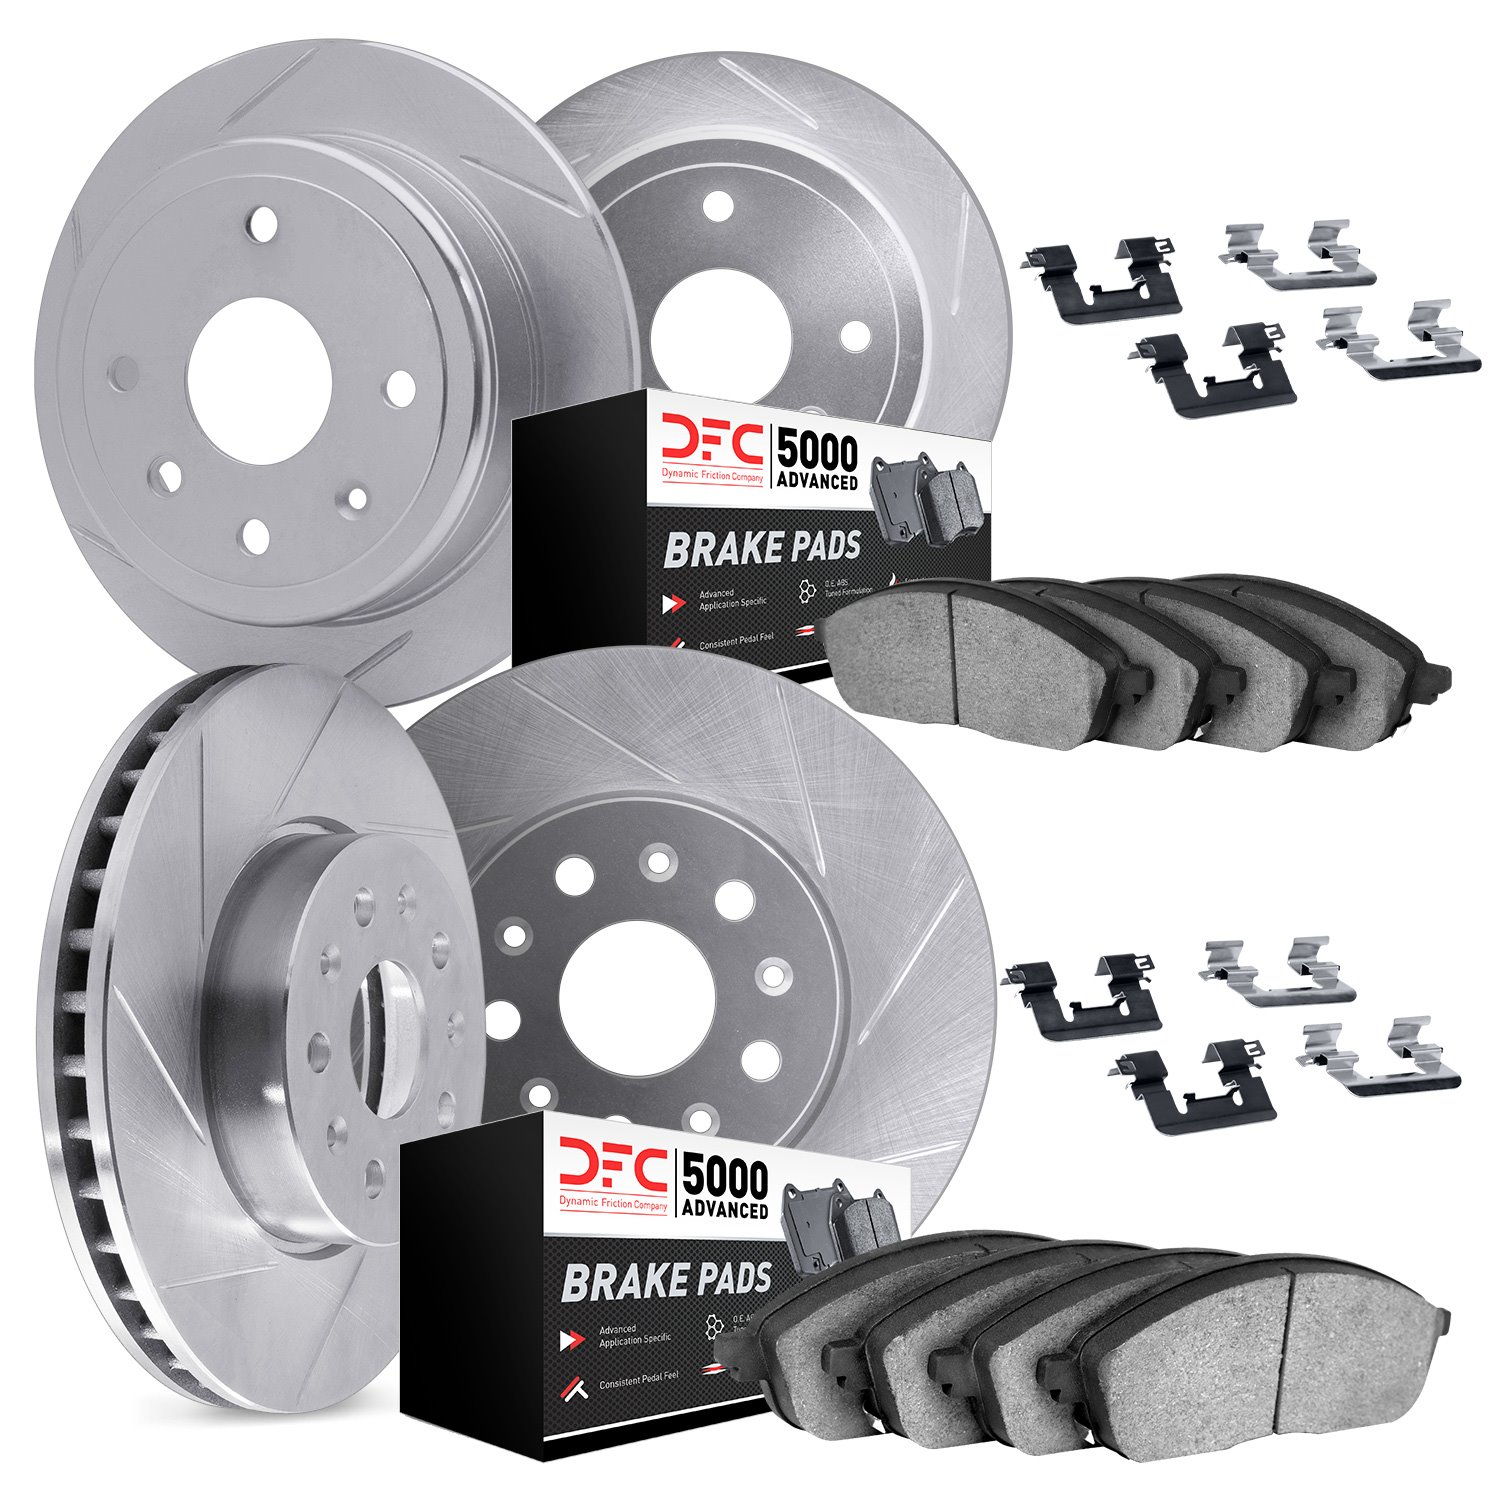 5514-39016 Slotted Brake Rotors w/5000 Advanced Brake Pads Kit & Hardware [Silver], 2004-2008 Mopar, Position: Front and Rear